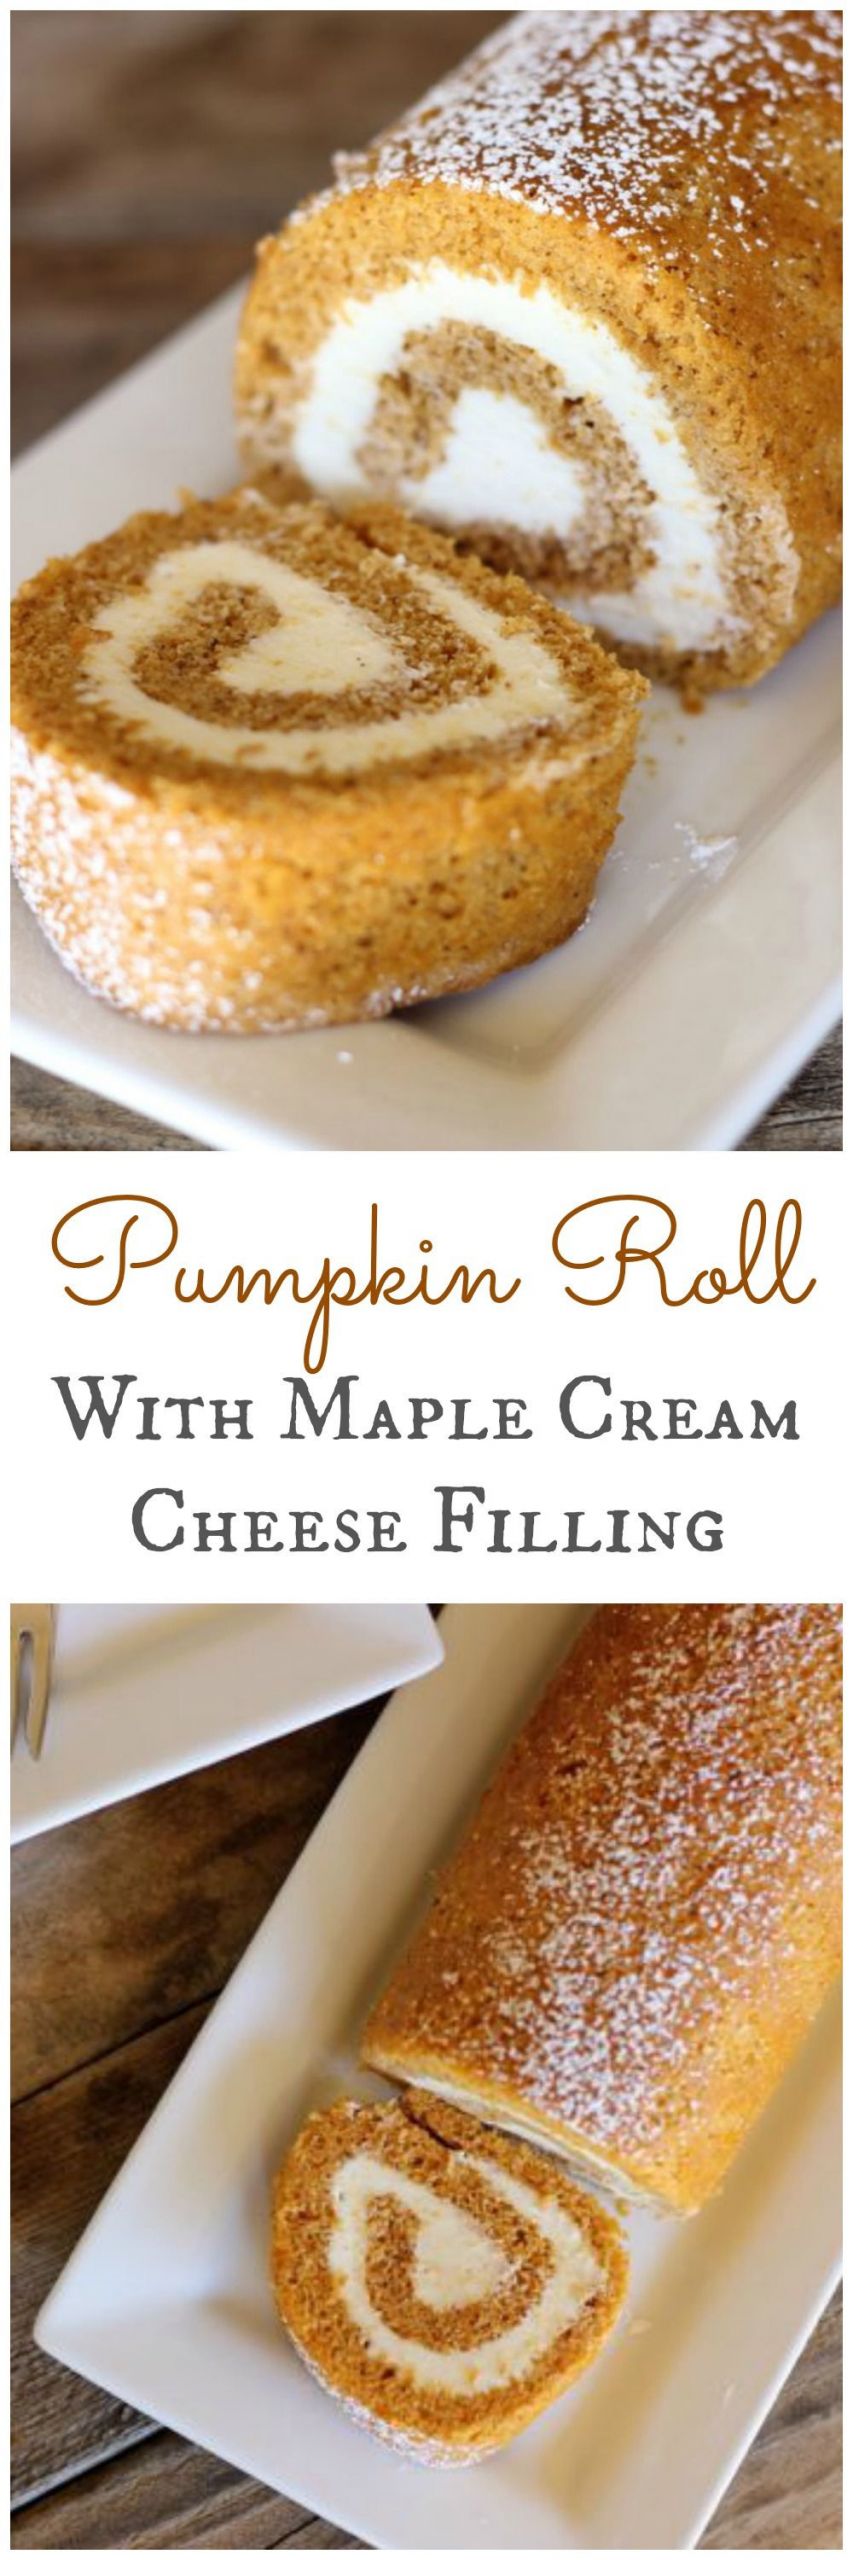 Pumpkin Roll Recipes With Cream Cheese Filling
 Pumpkin Roll With Maple Cream Cheese Filling